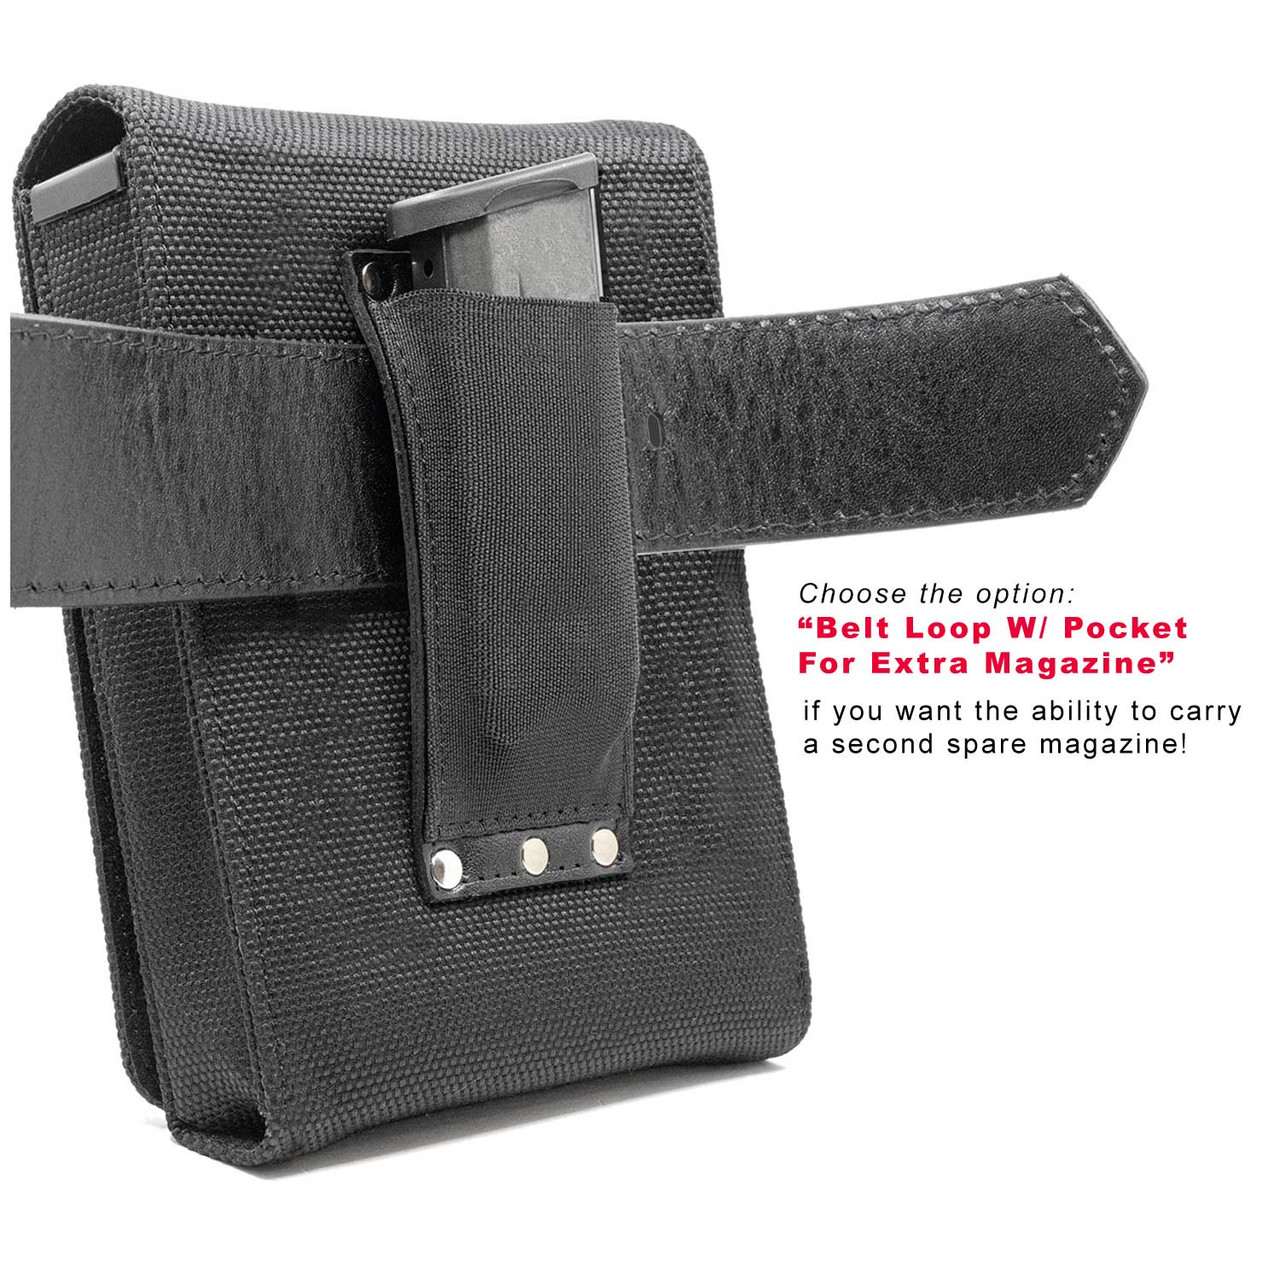 The Bodyguard .38 Special Xtra Mag Black Leather Holster